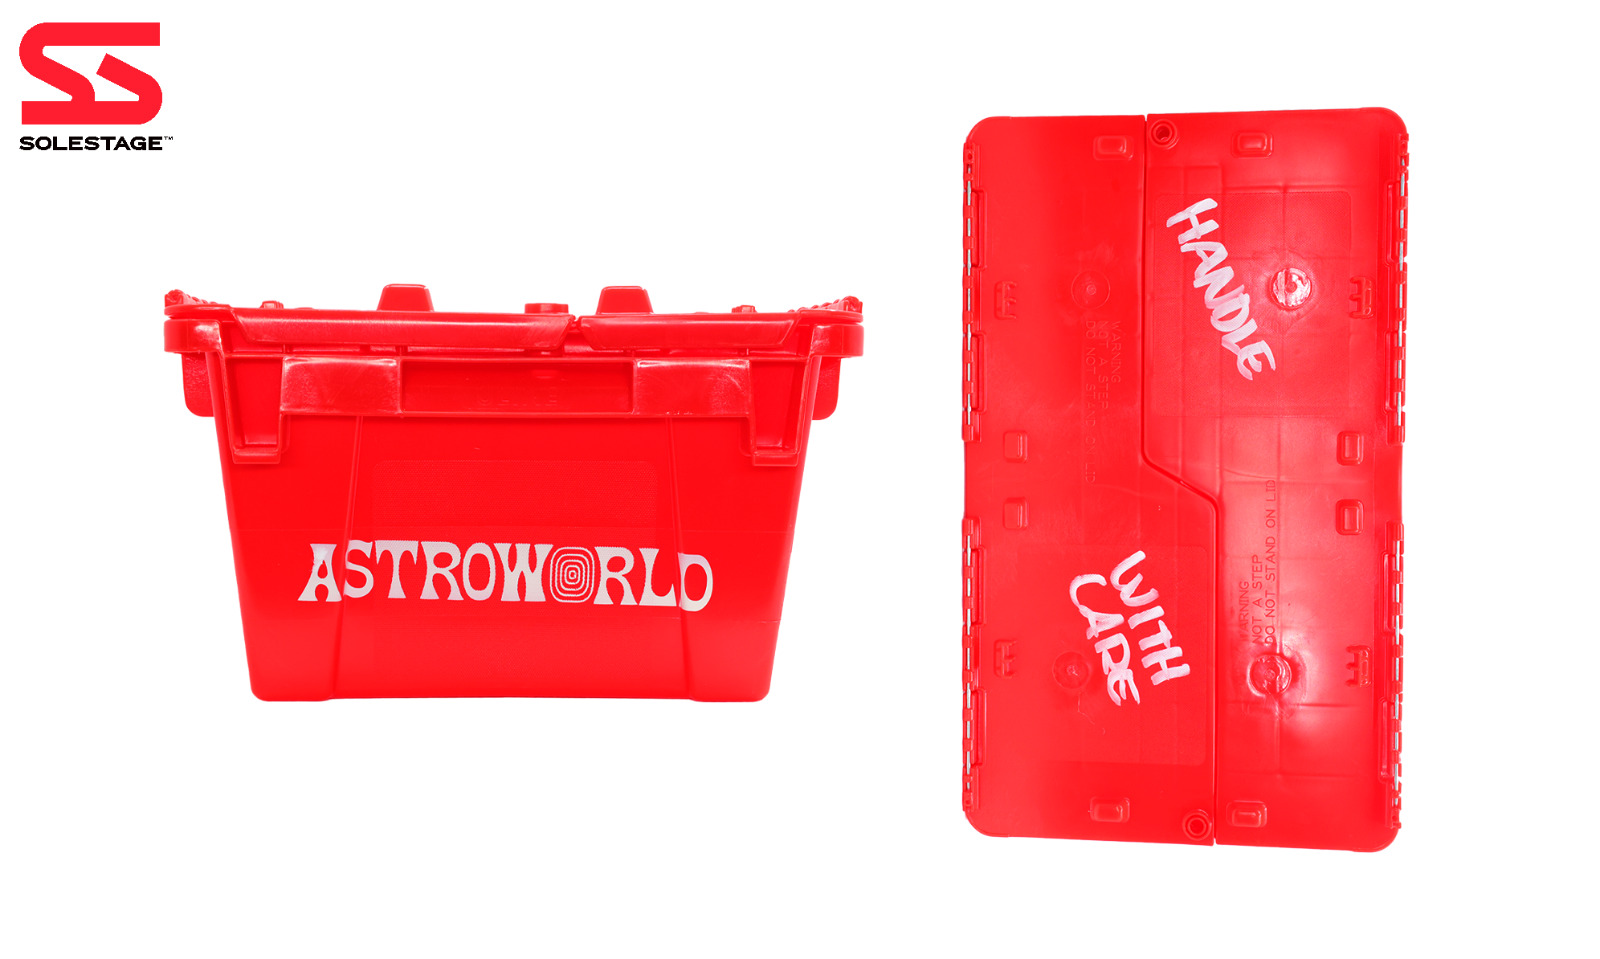 Travis Scott Astroworld Printed Crate - Stackable Red 2018 (TSCJ-CT001) One Size